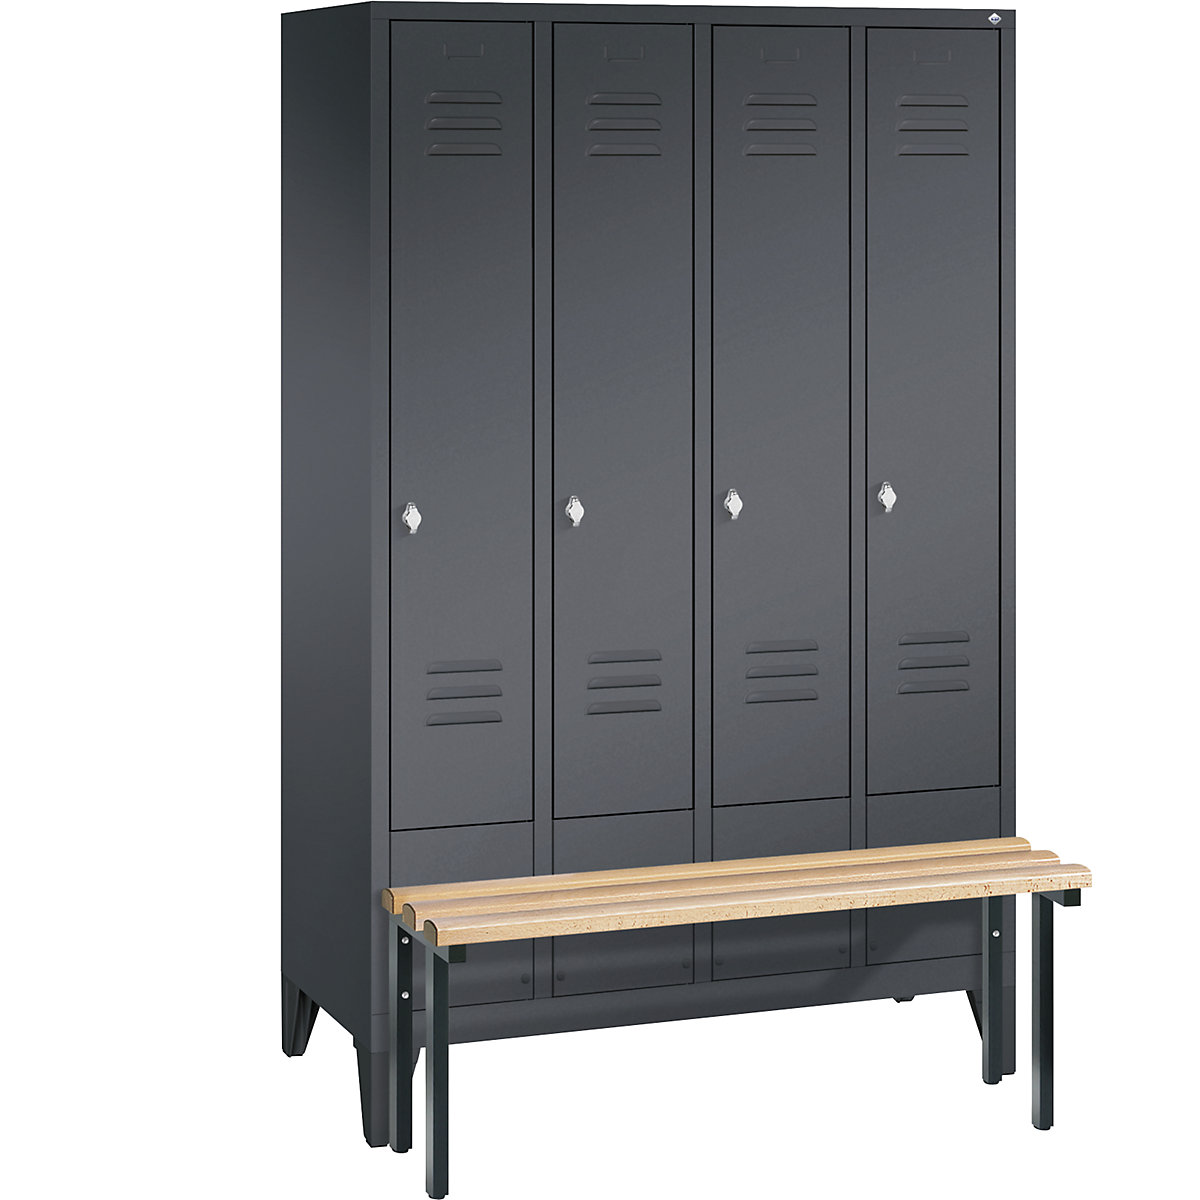 CLASSIC cloakroom locker with bench mounted in front – C+P, 4 compartments, compartment width 300 mm, black grey-14